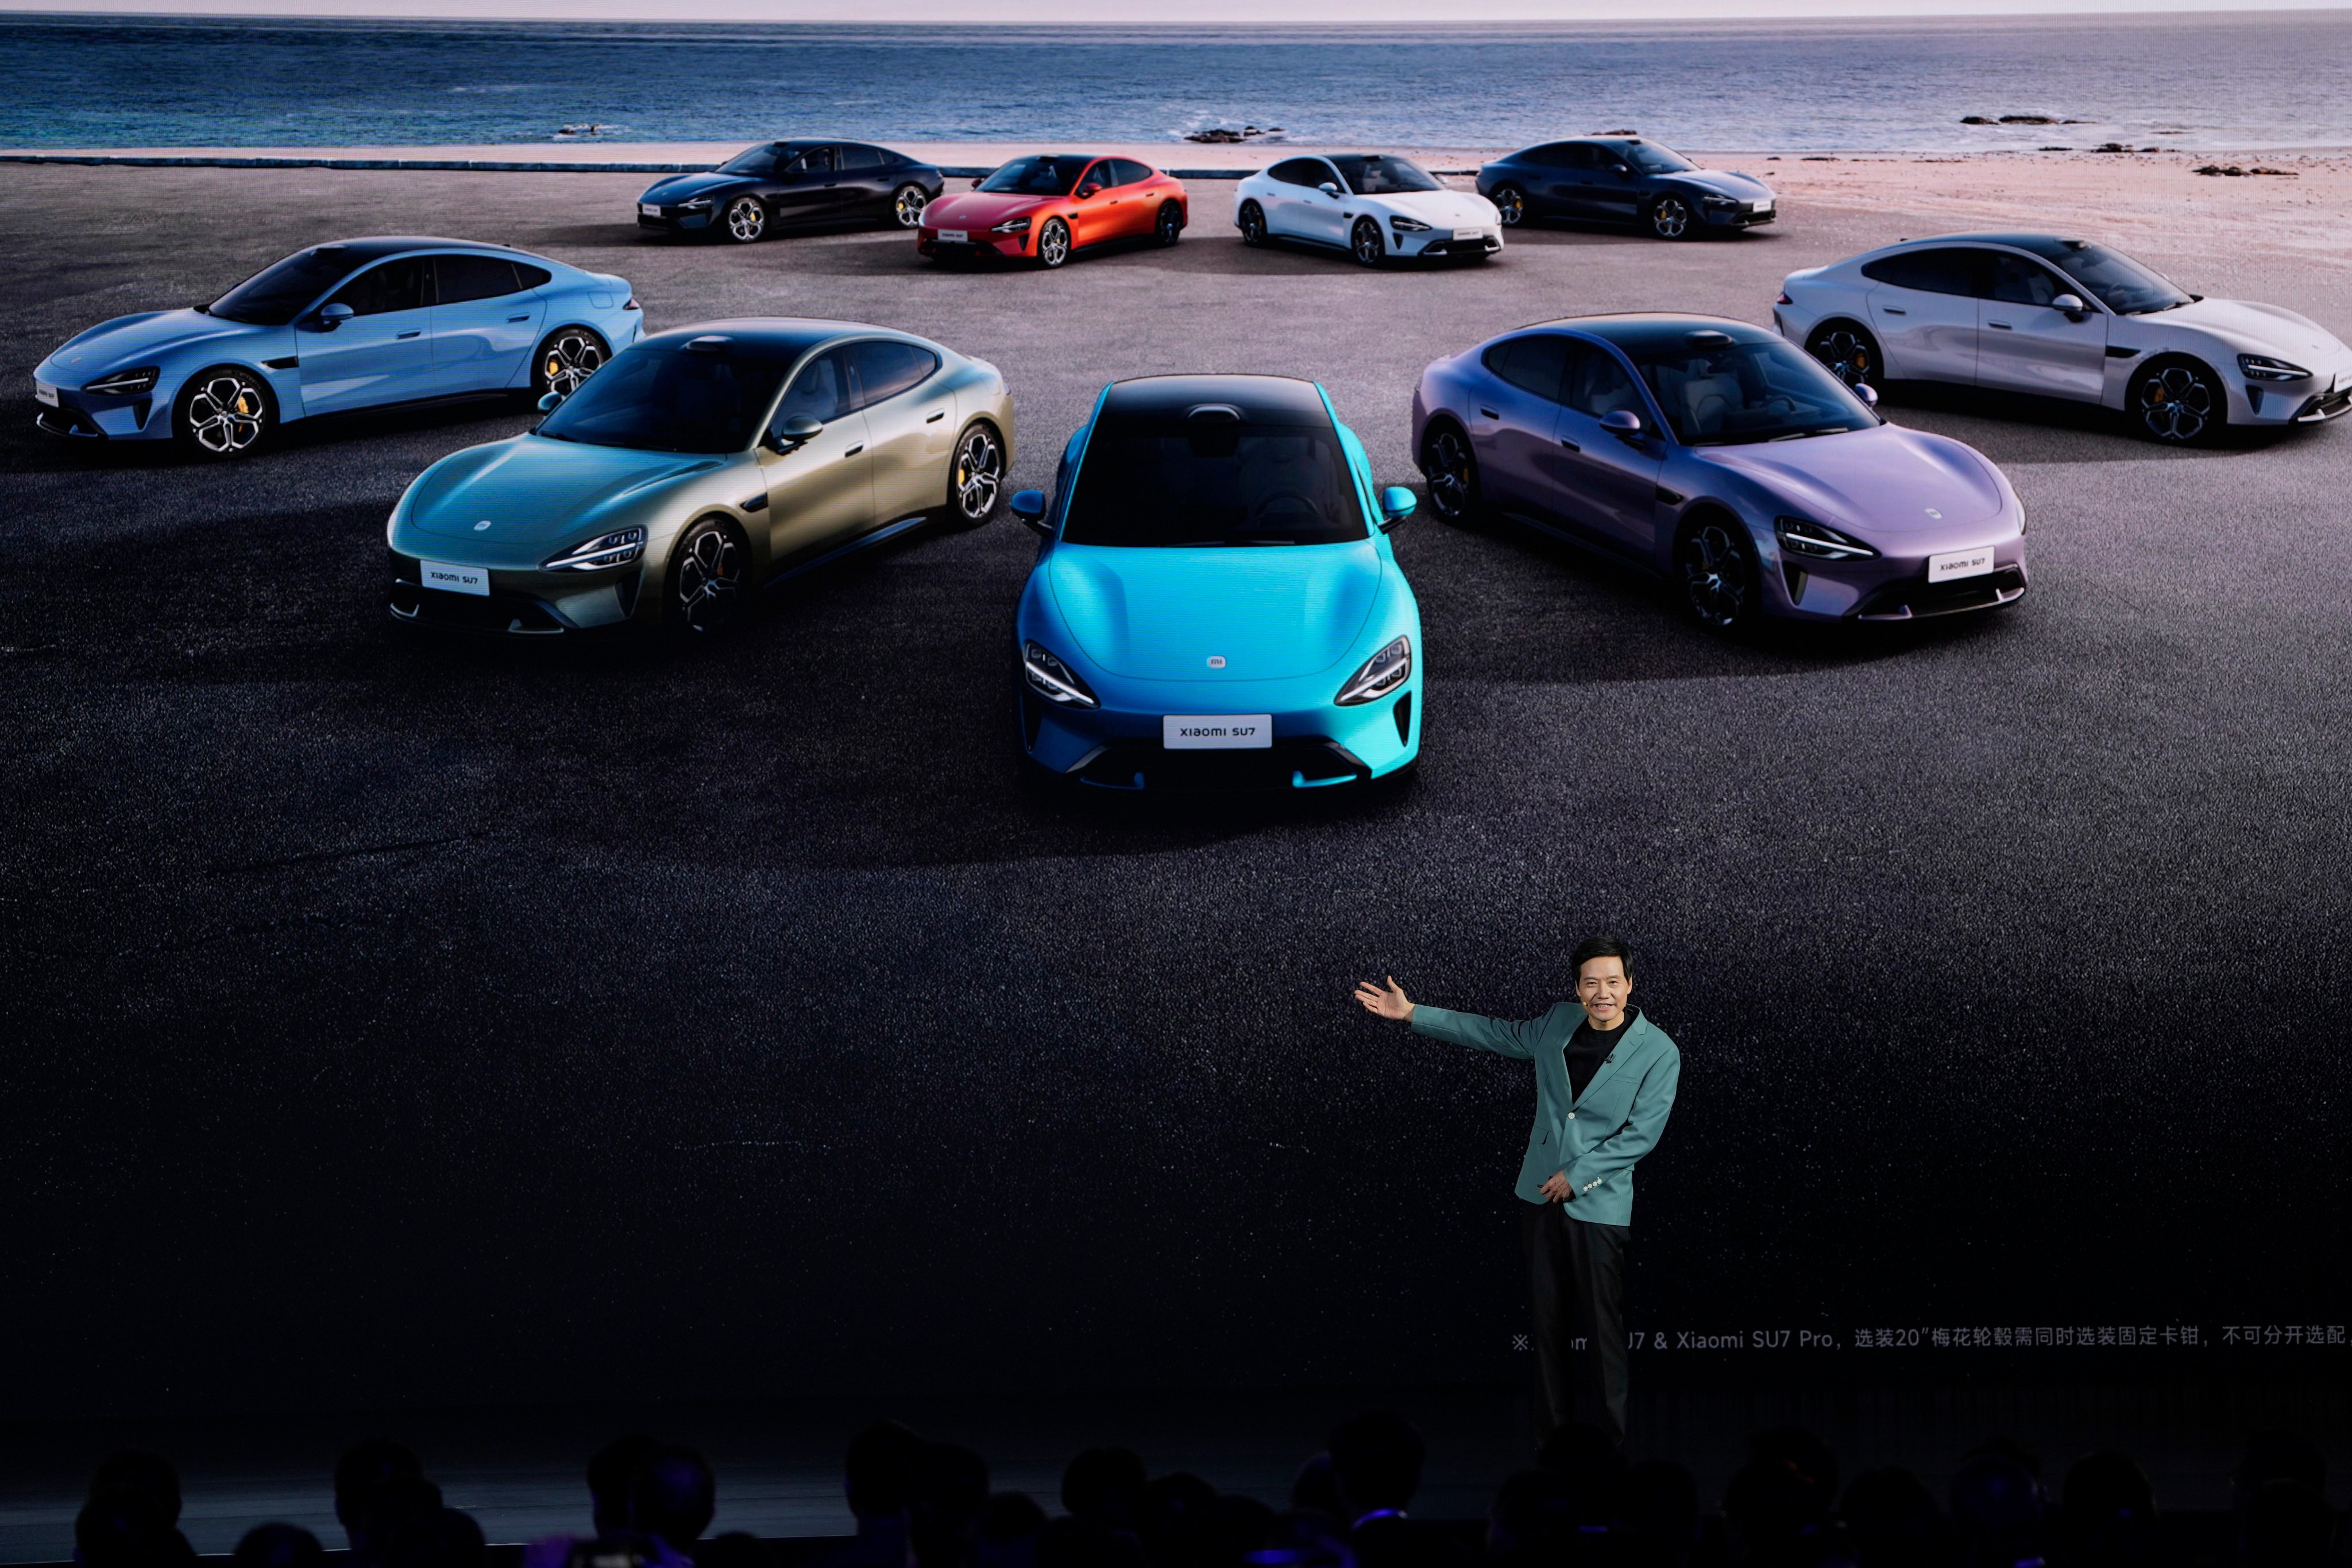 Xiaomi founder Lei Jun shows off the multiple colours of the SU7, a sporty four-door electric vehicle, during a launch event in Beijing, on March 28. Photo: AP 